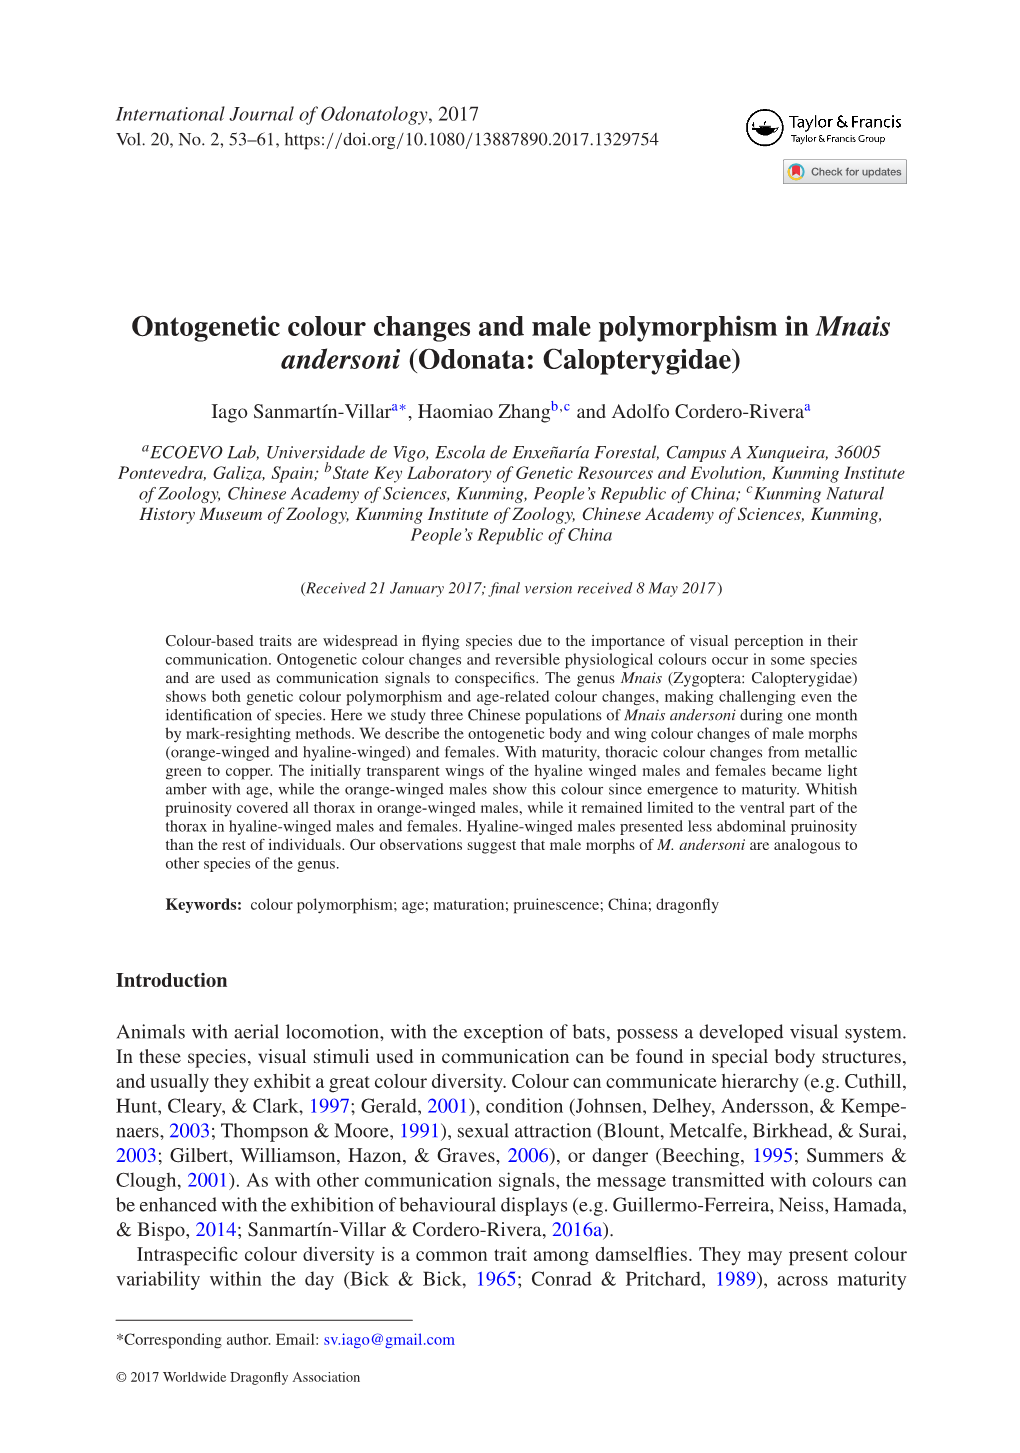 Ontogenetic Colour Changes and Male Polymorphism in Mnais Andersoni (Odonata: Calopterygidae)